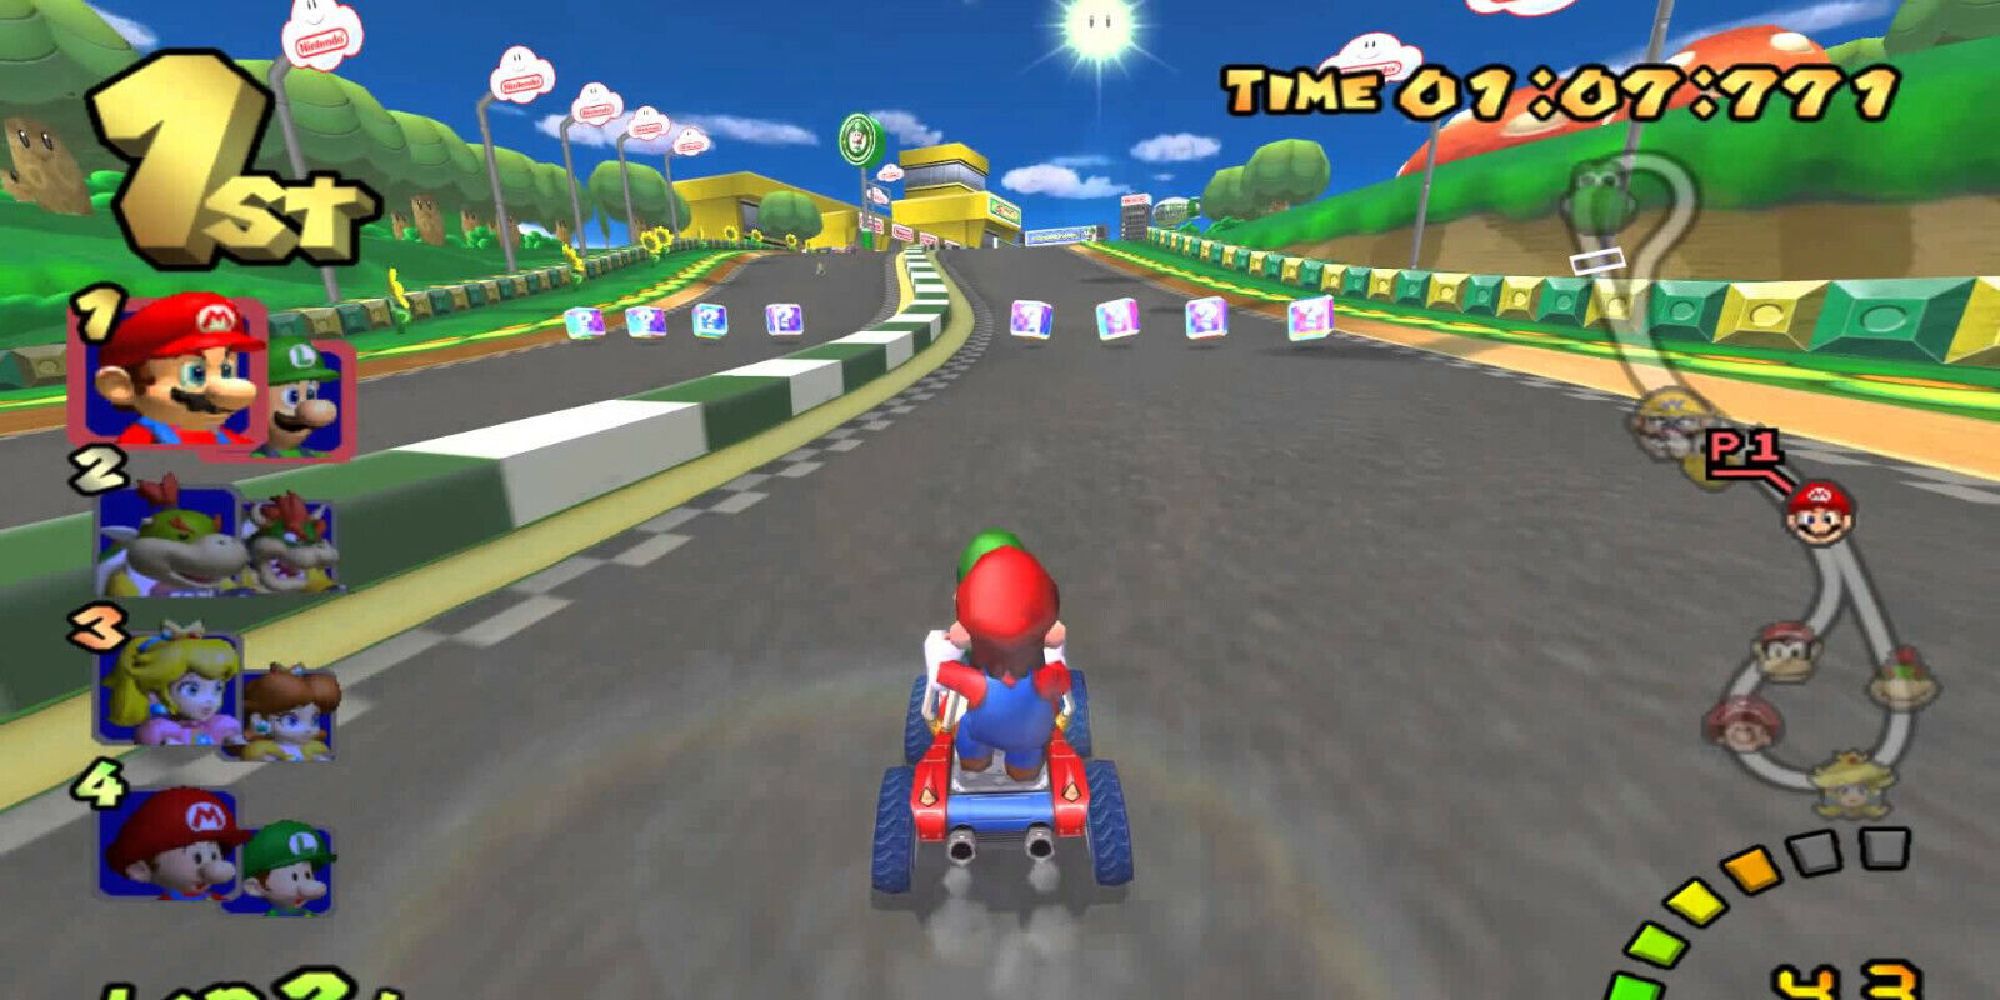 Mario and Luigi double-teaming on one kart, in first place of the race. 